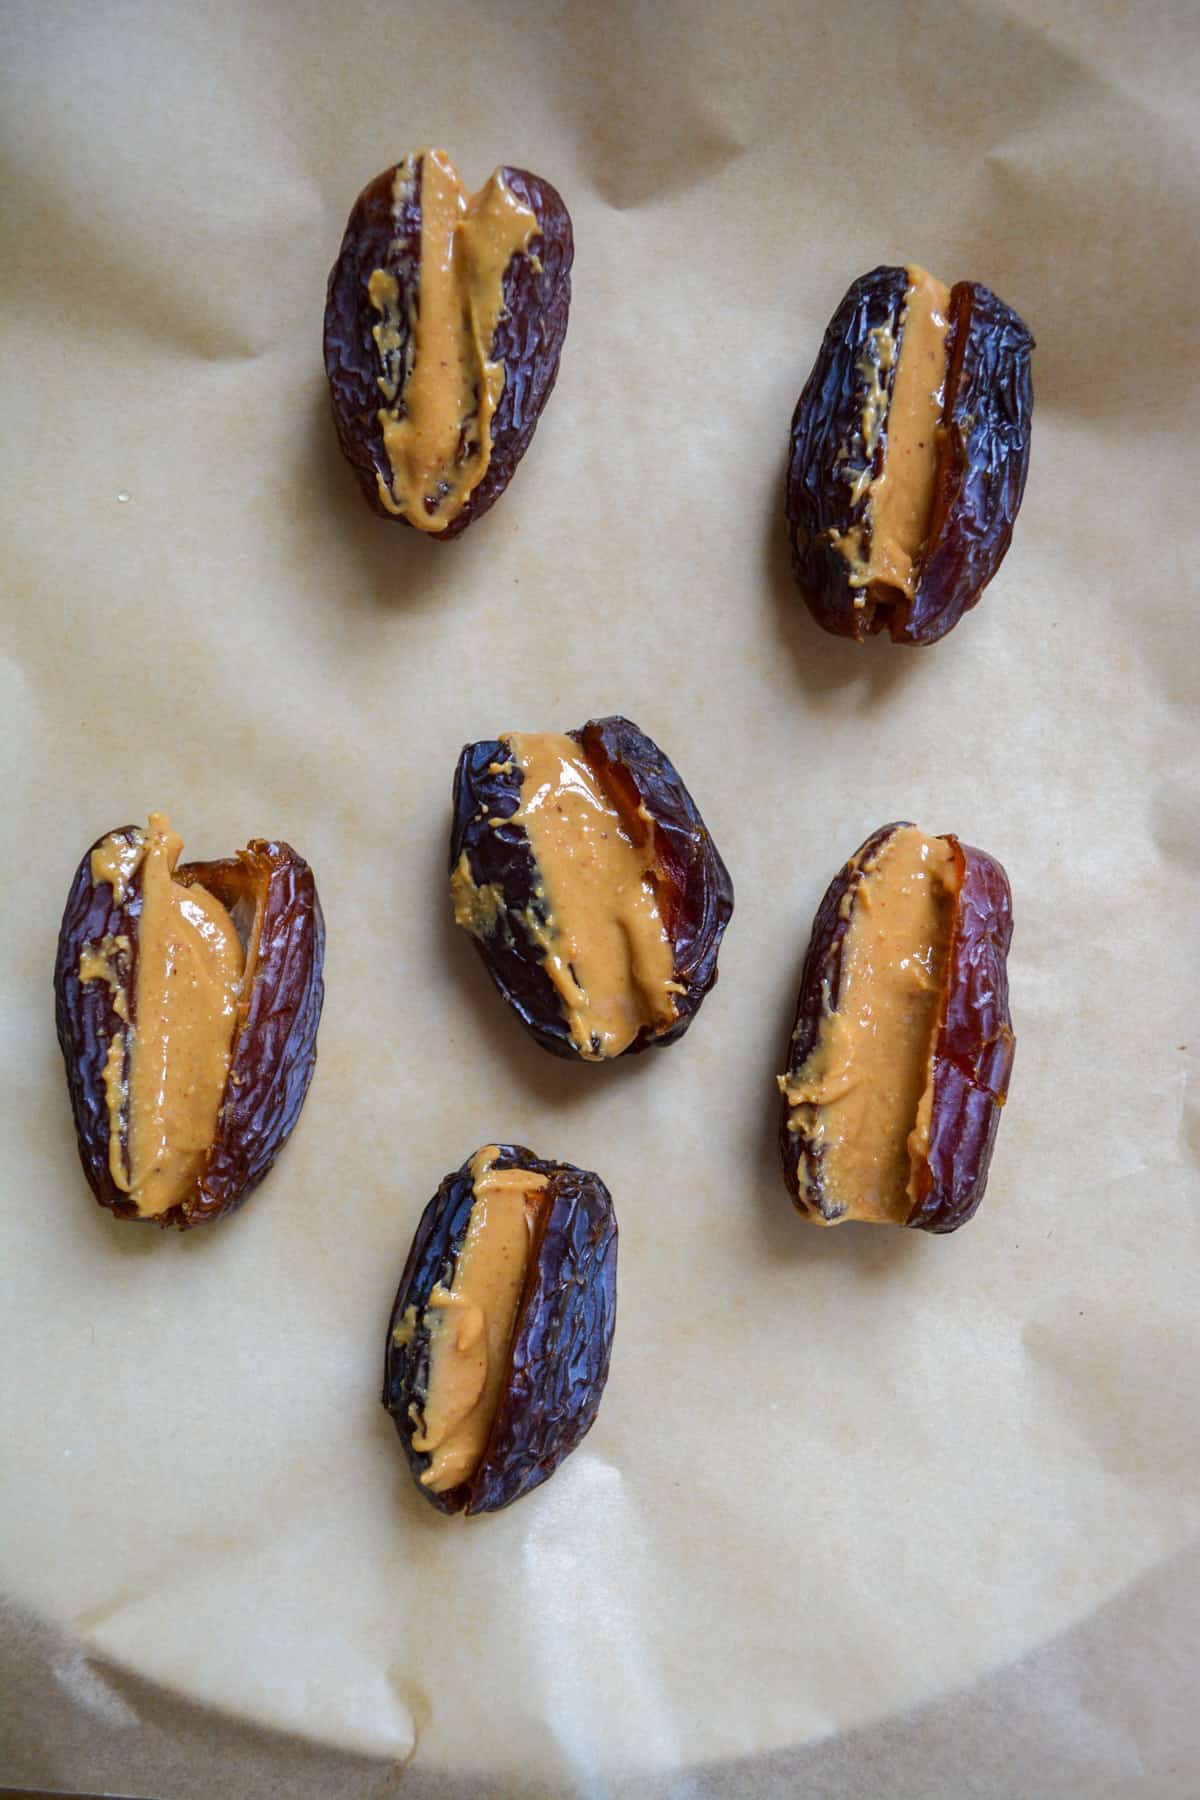 Peanut butter stuffed in the middle of the dates on a parchment lined plate.